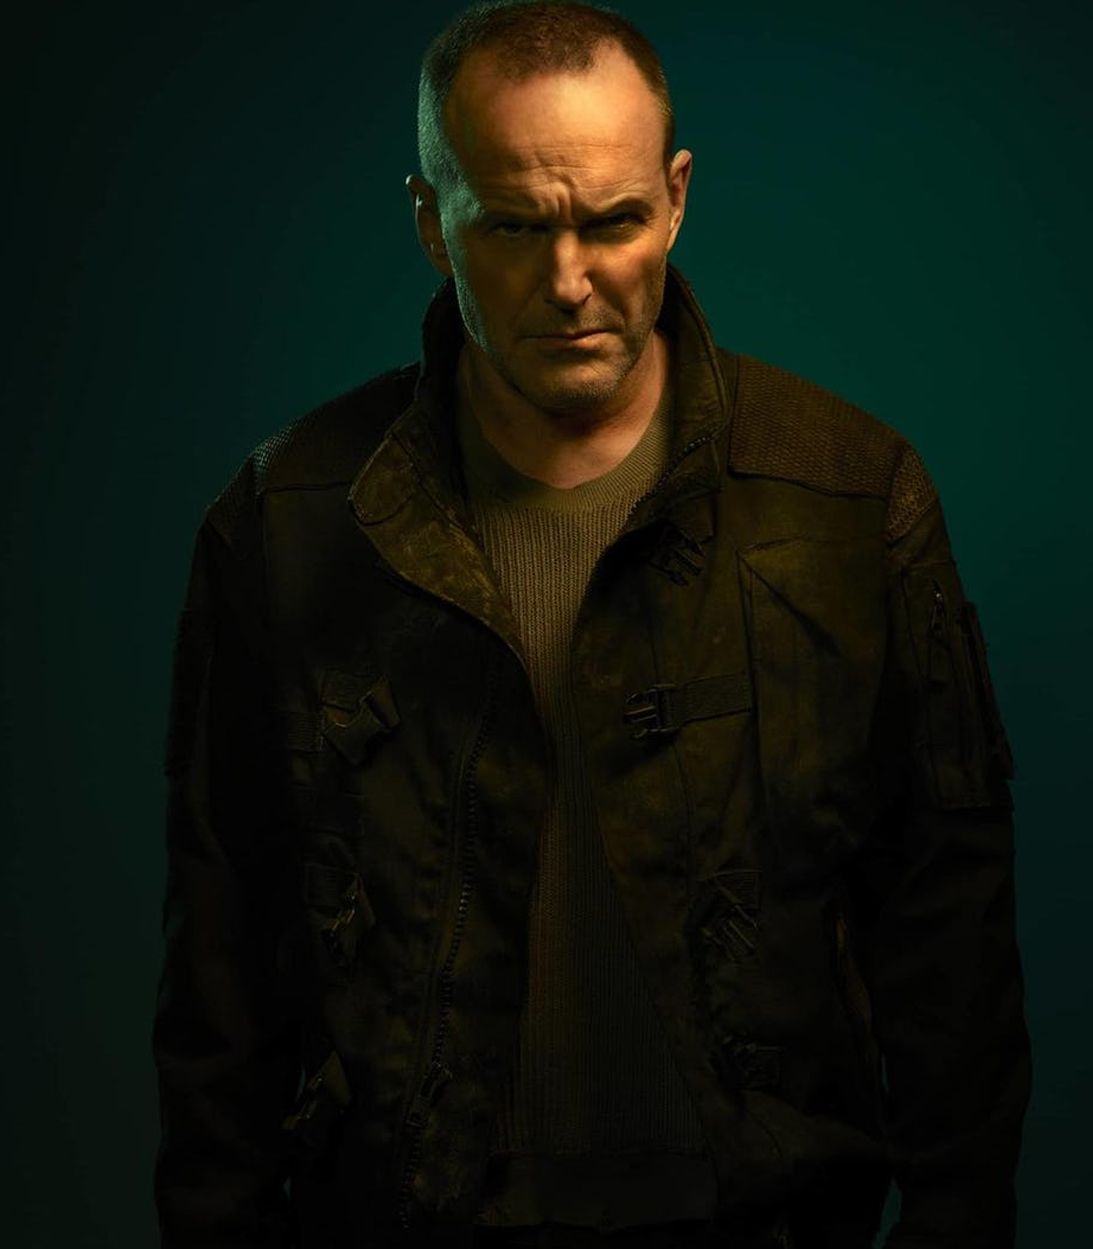 Clark Gregg as Sarge in Agents of SHIELD